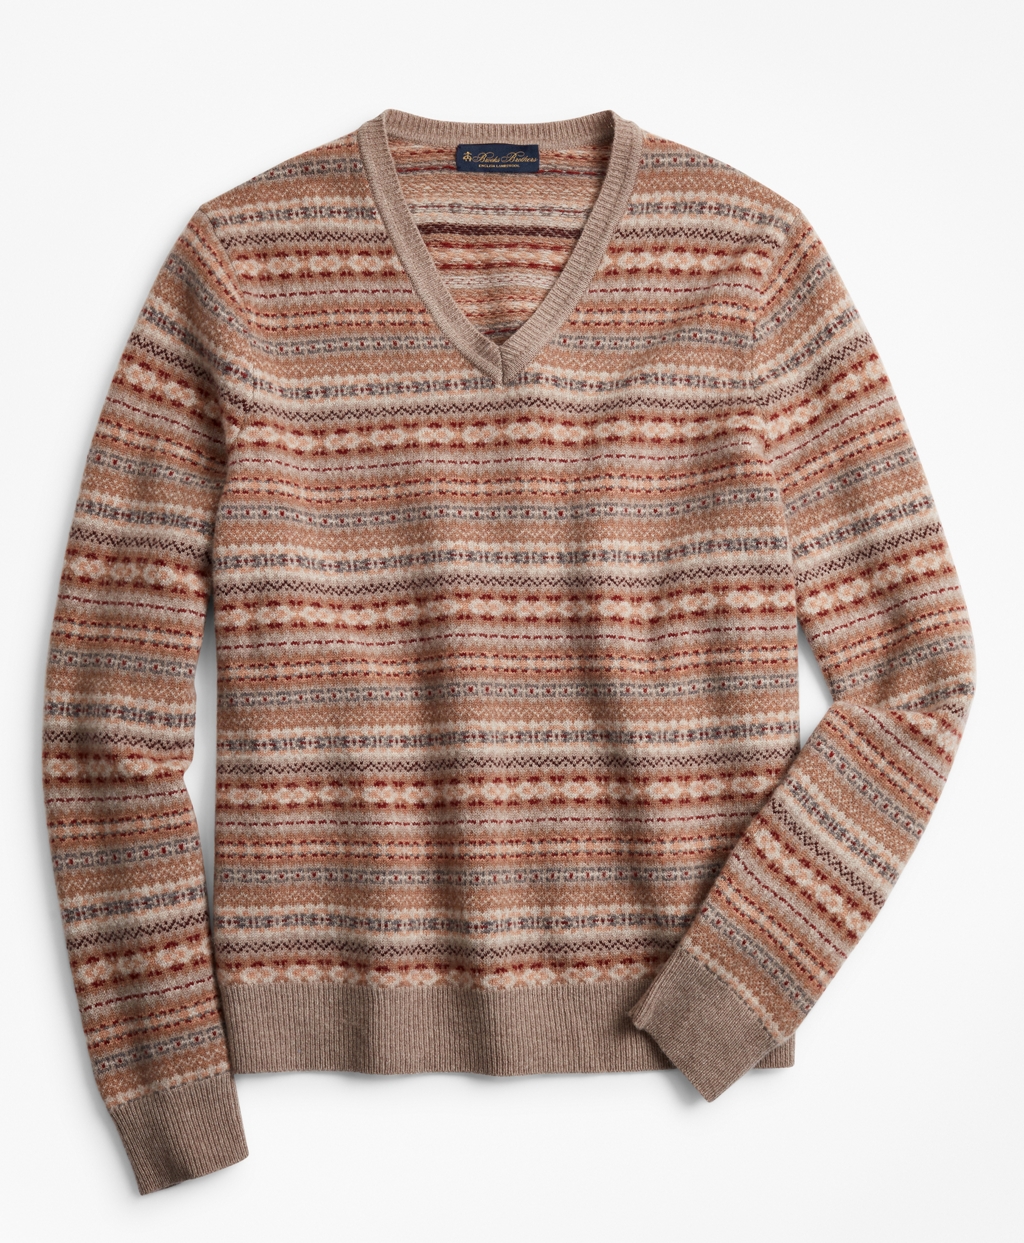 Men's Vintage Sweaters - 1920s to 1960s Retro Jumpers